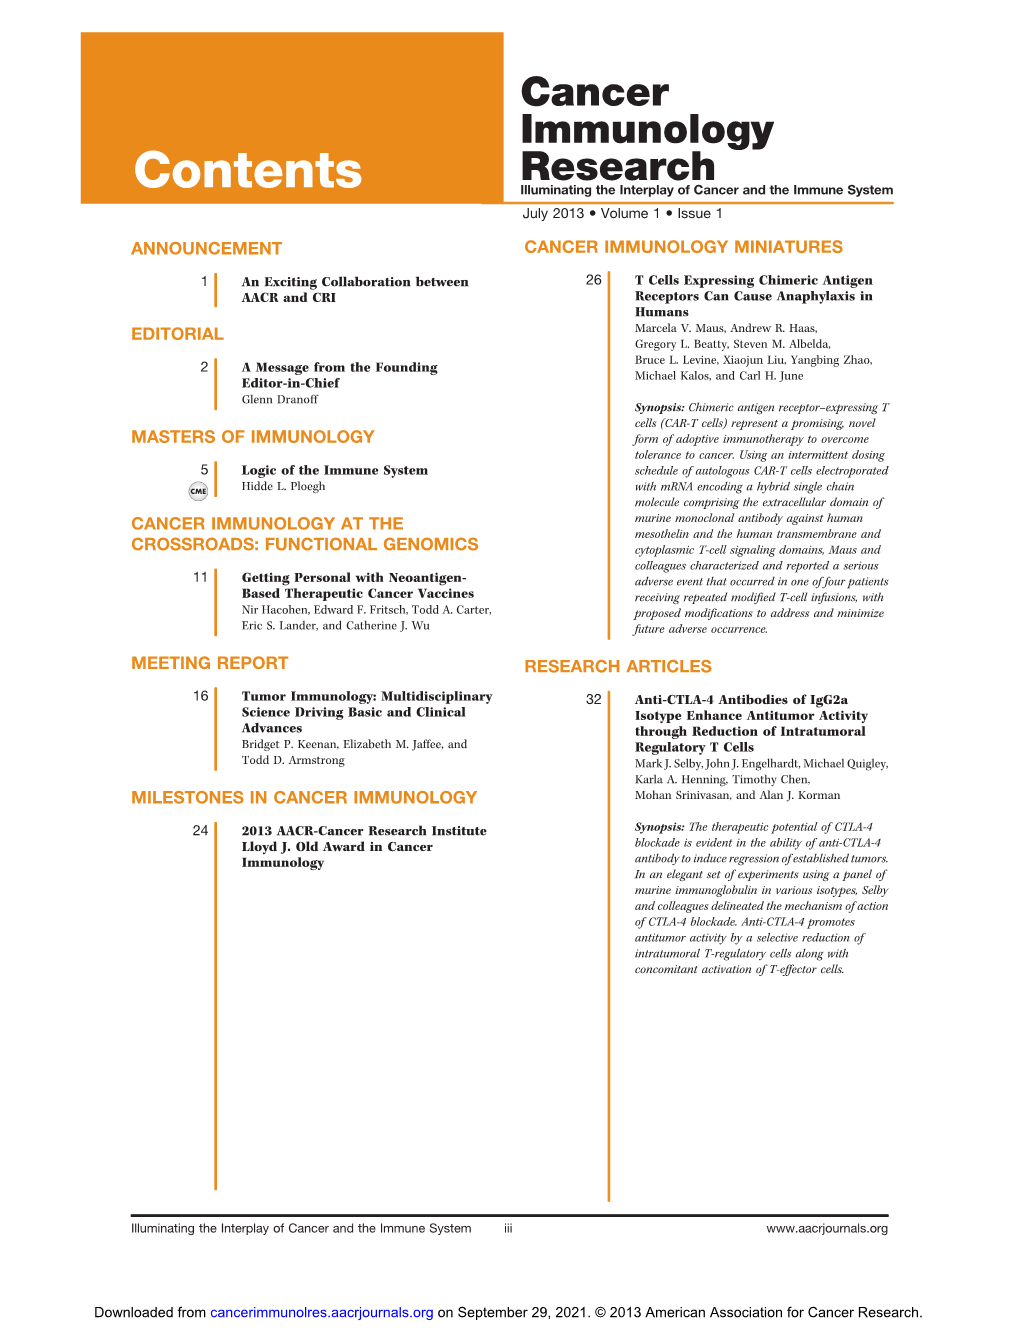 Contents Research Illuminating the Interplay of Cancer and the Immune System July 2013 � Volume 1 � Issue 1